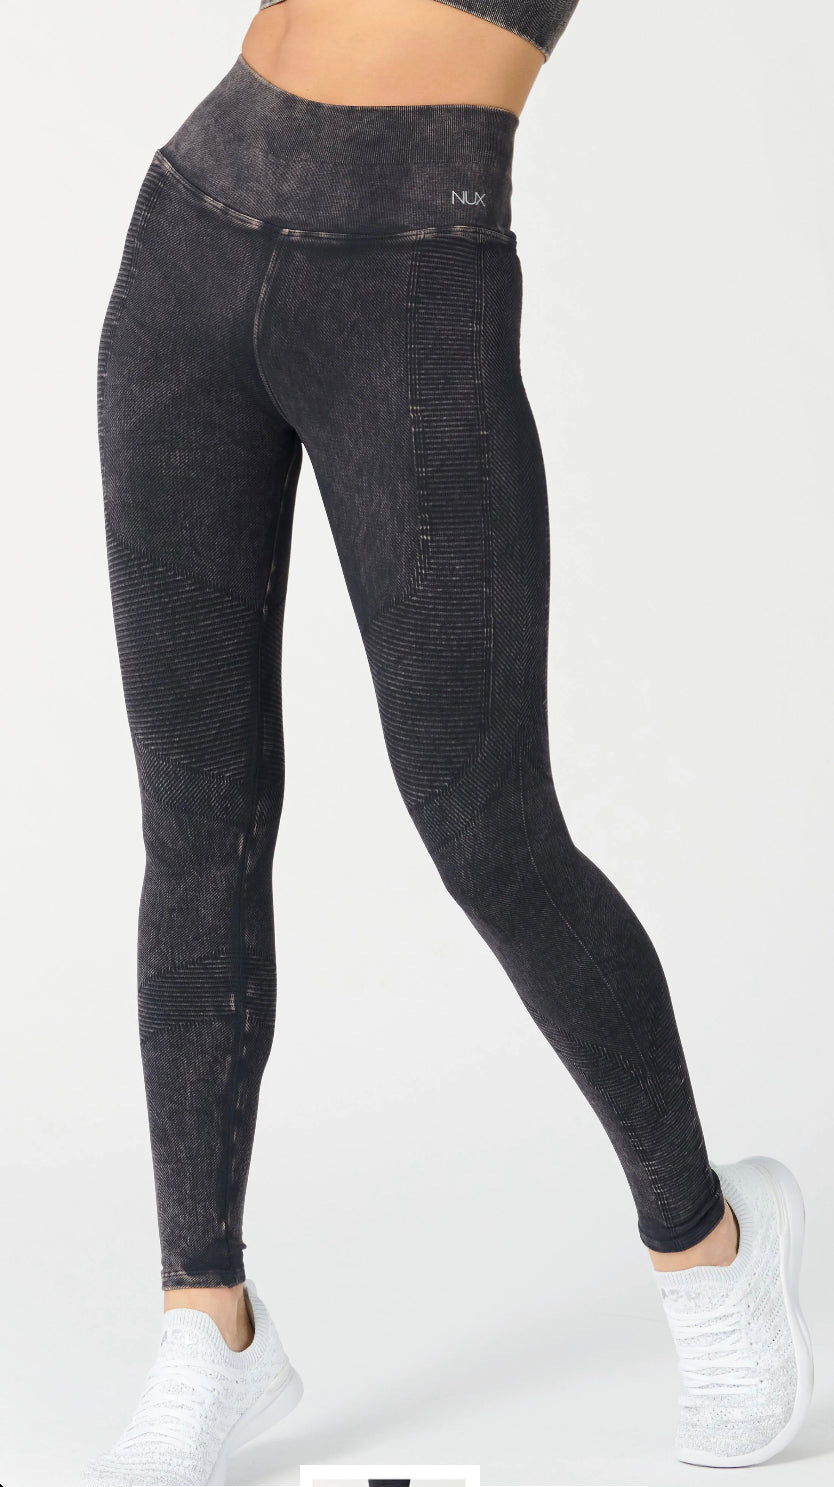 NUX One by One 7/8 Legging in Black Mineral Wash